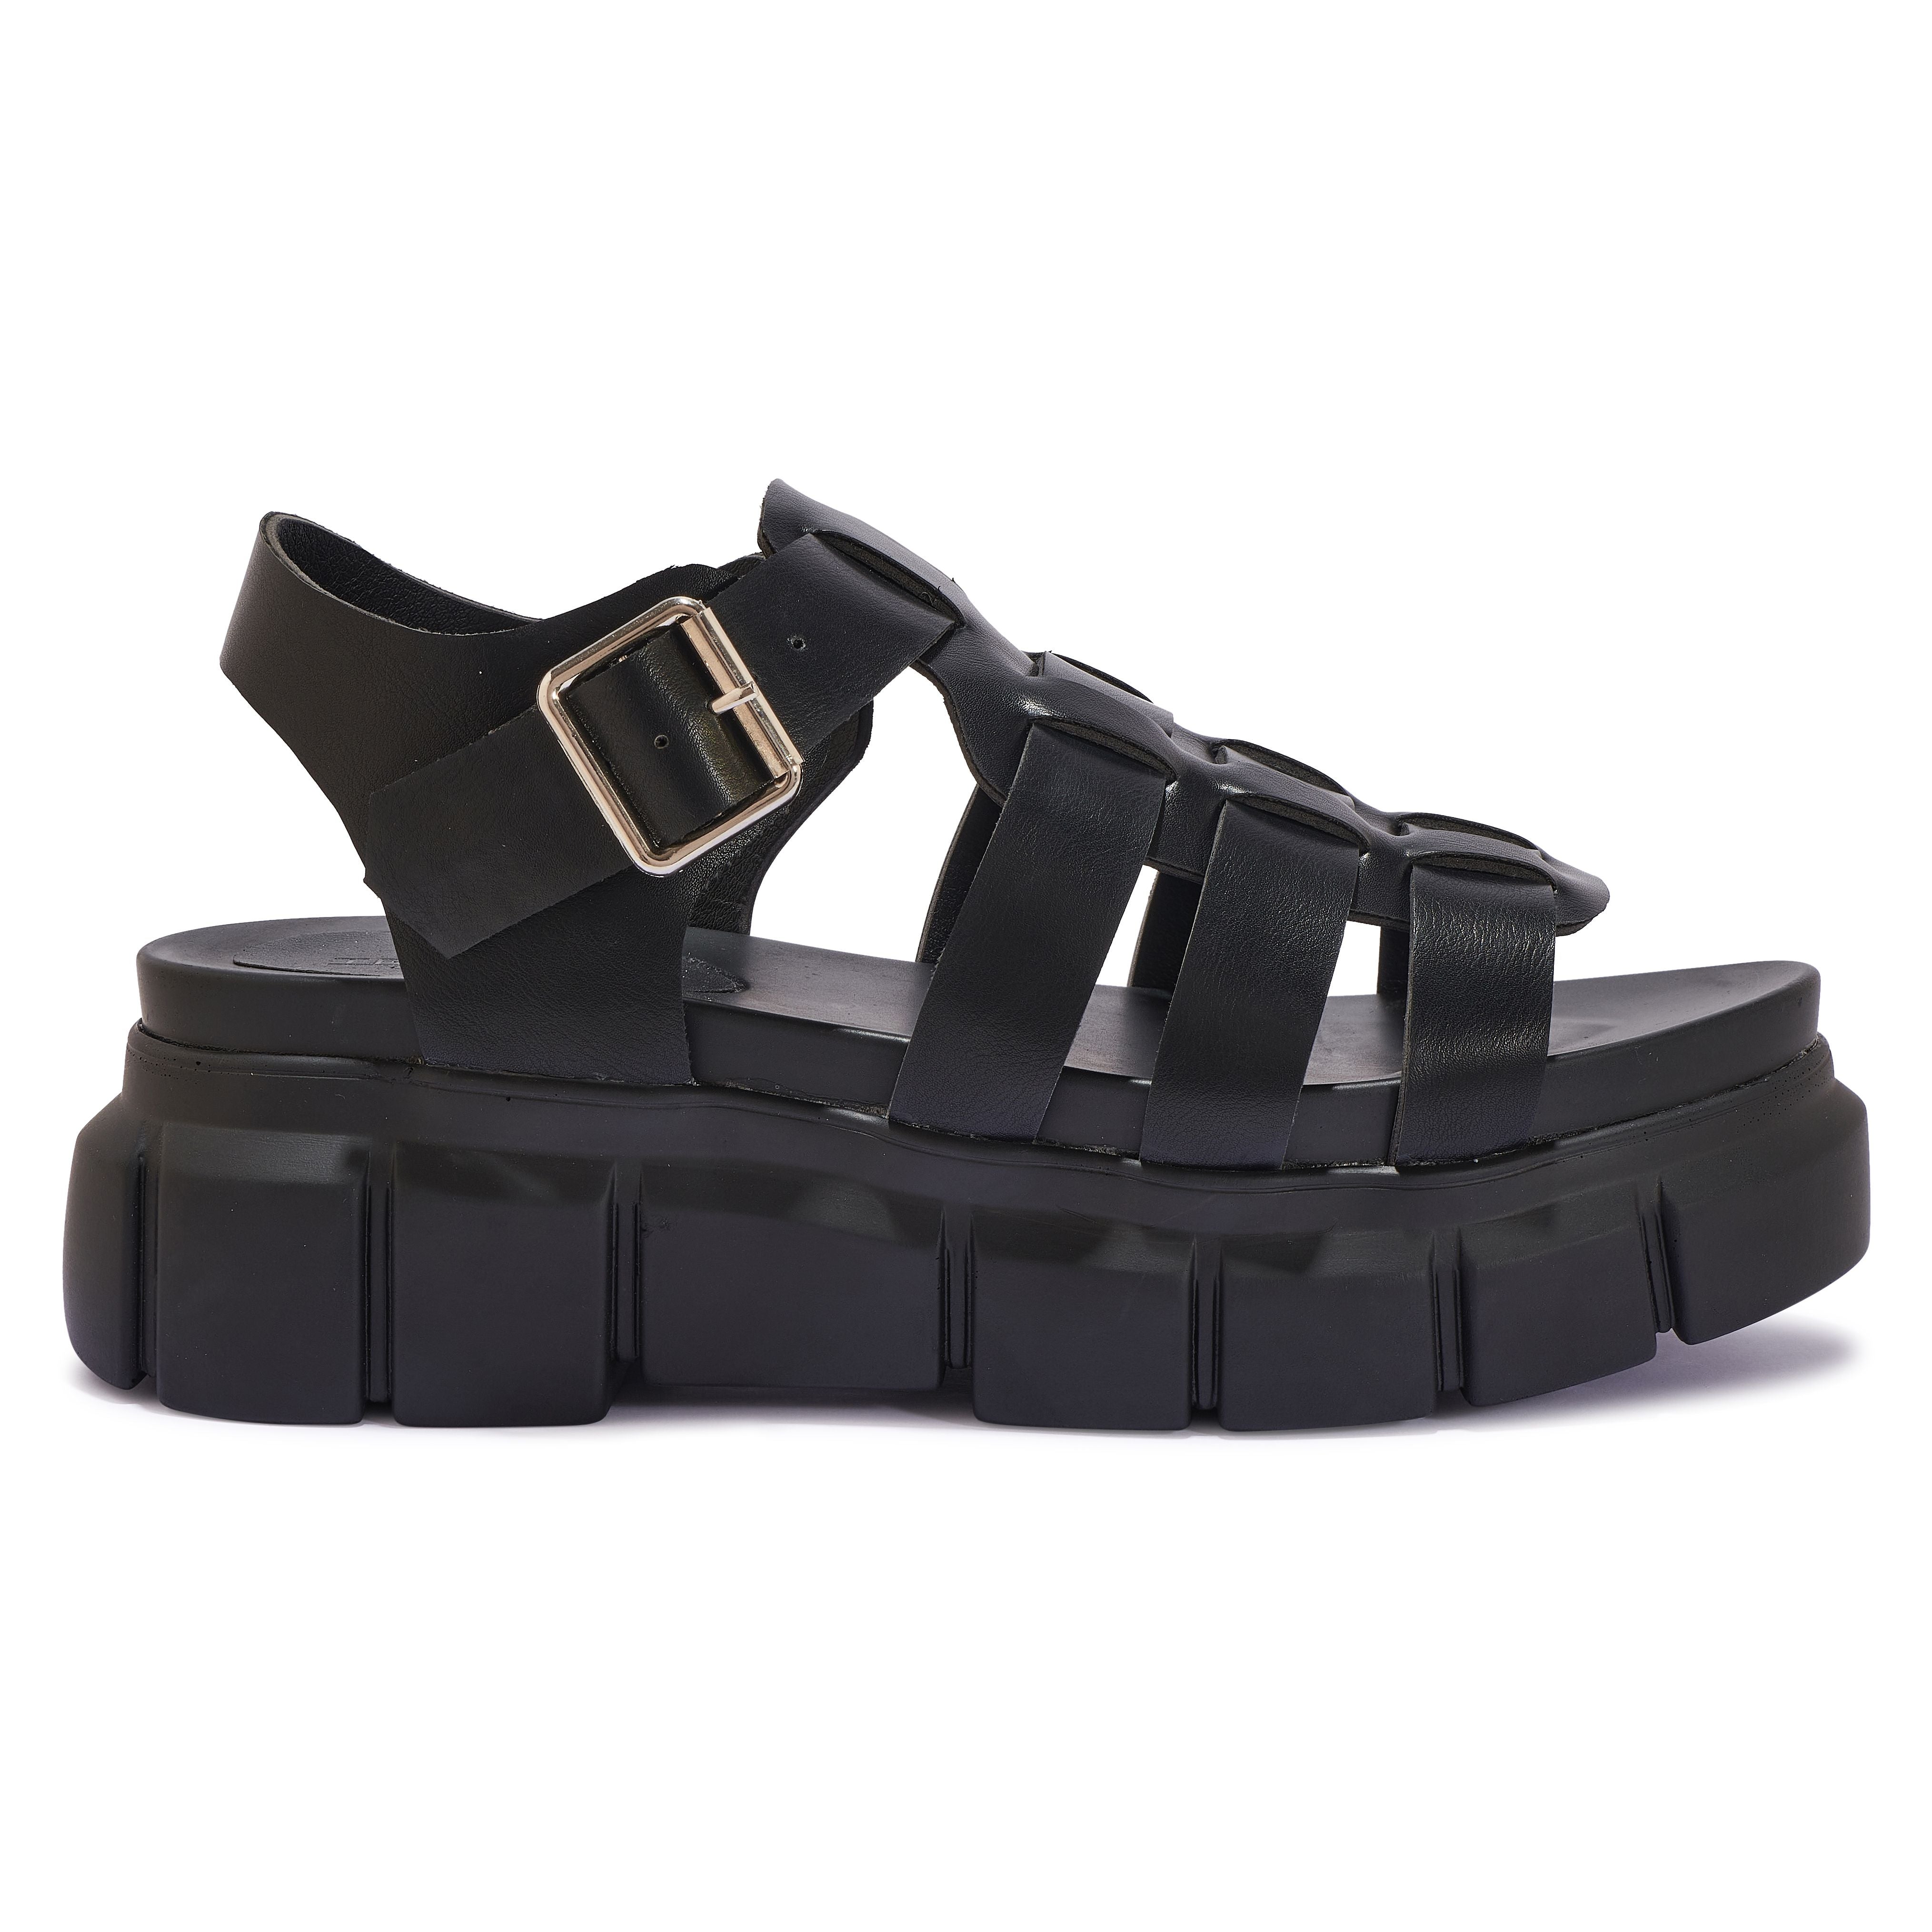 CRIME13 - CHUNKY STRAP CLEATED SOLE SANDAL